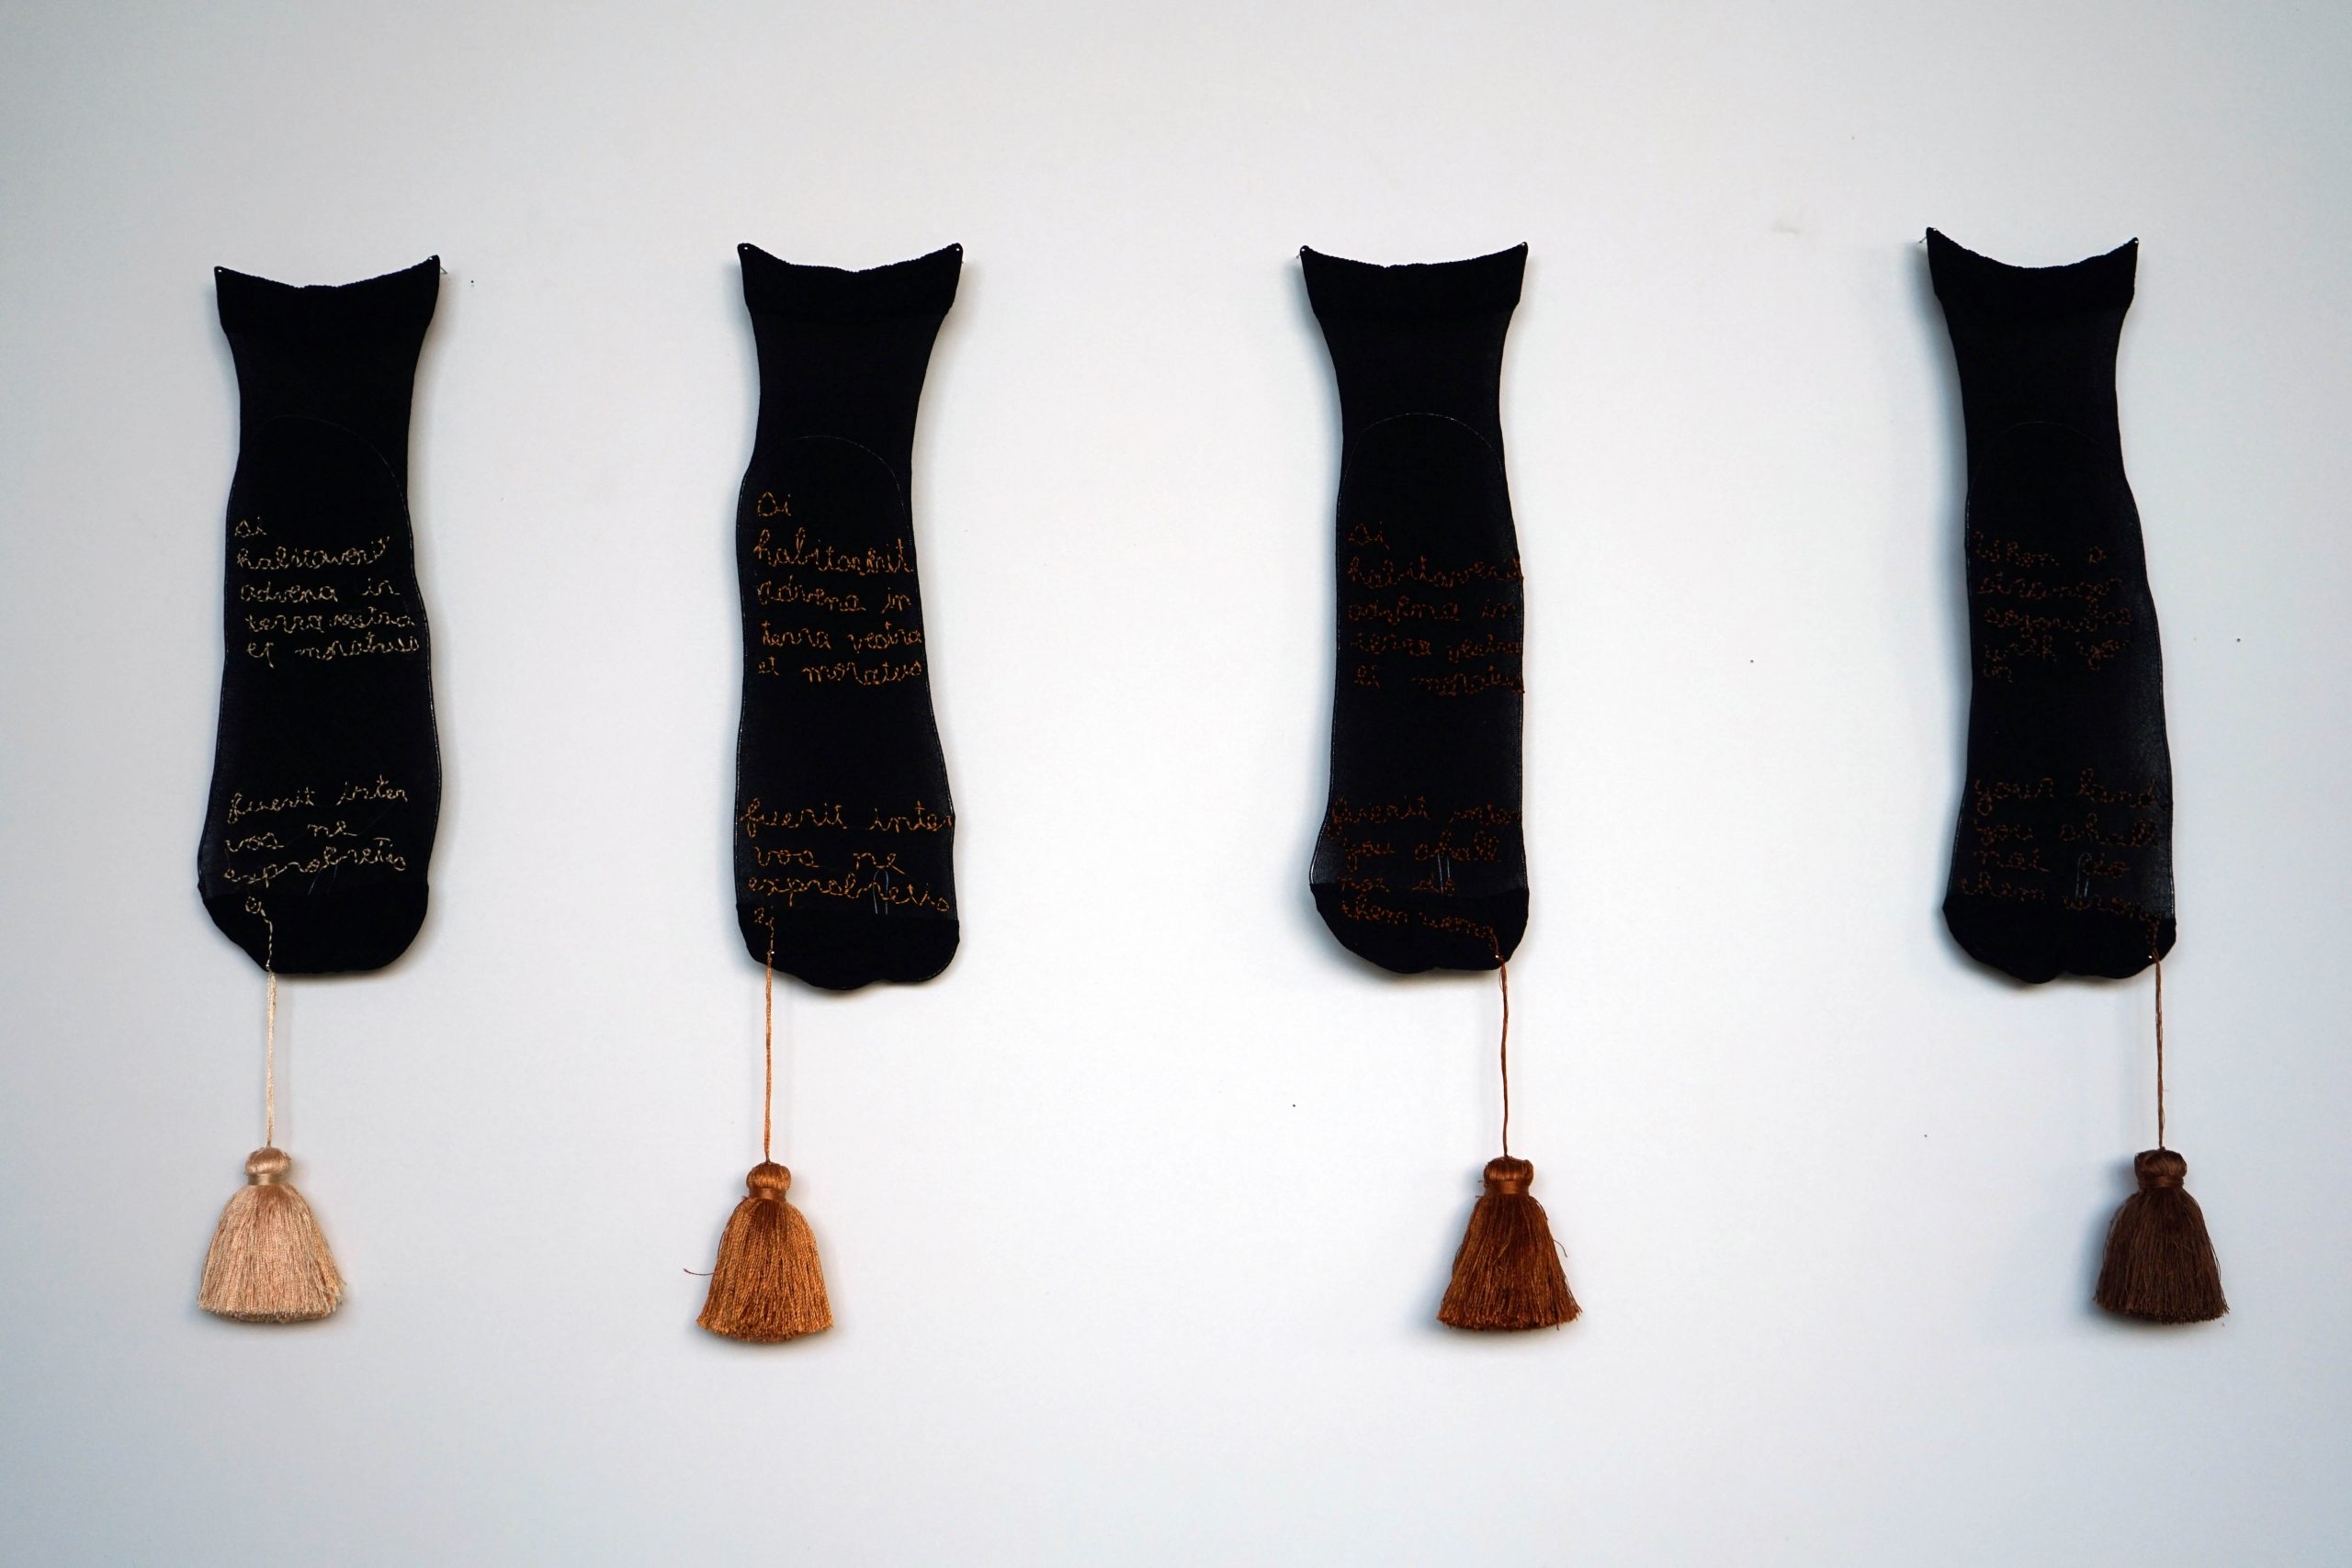 Dirt, Skin and Gold, 2019,Secondhand socks, silk thread embroidery, silk pom poms, 8 x 20 cm each. Socks embroidered with Old Testament text related to rights to land, translated in different ways. 